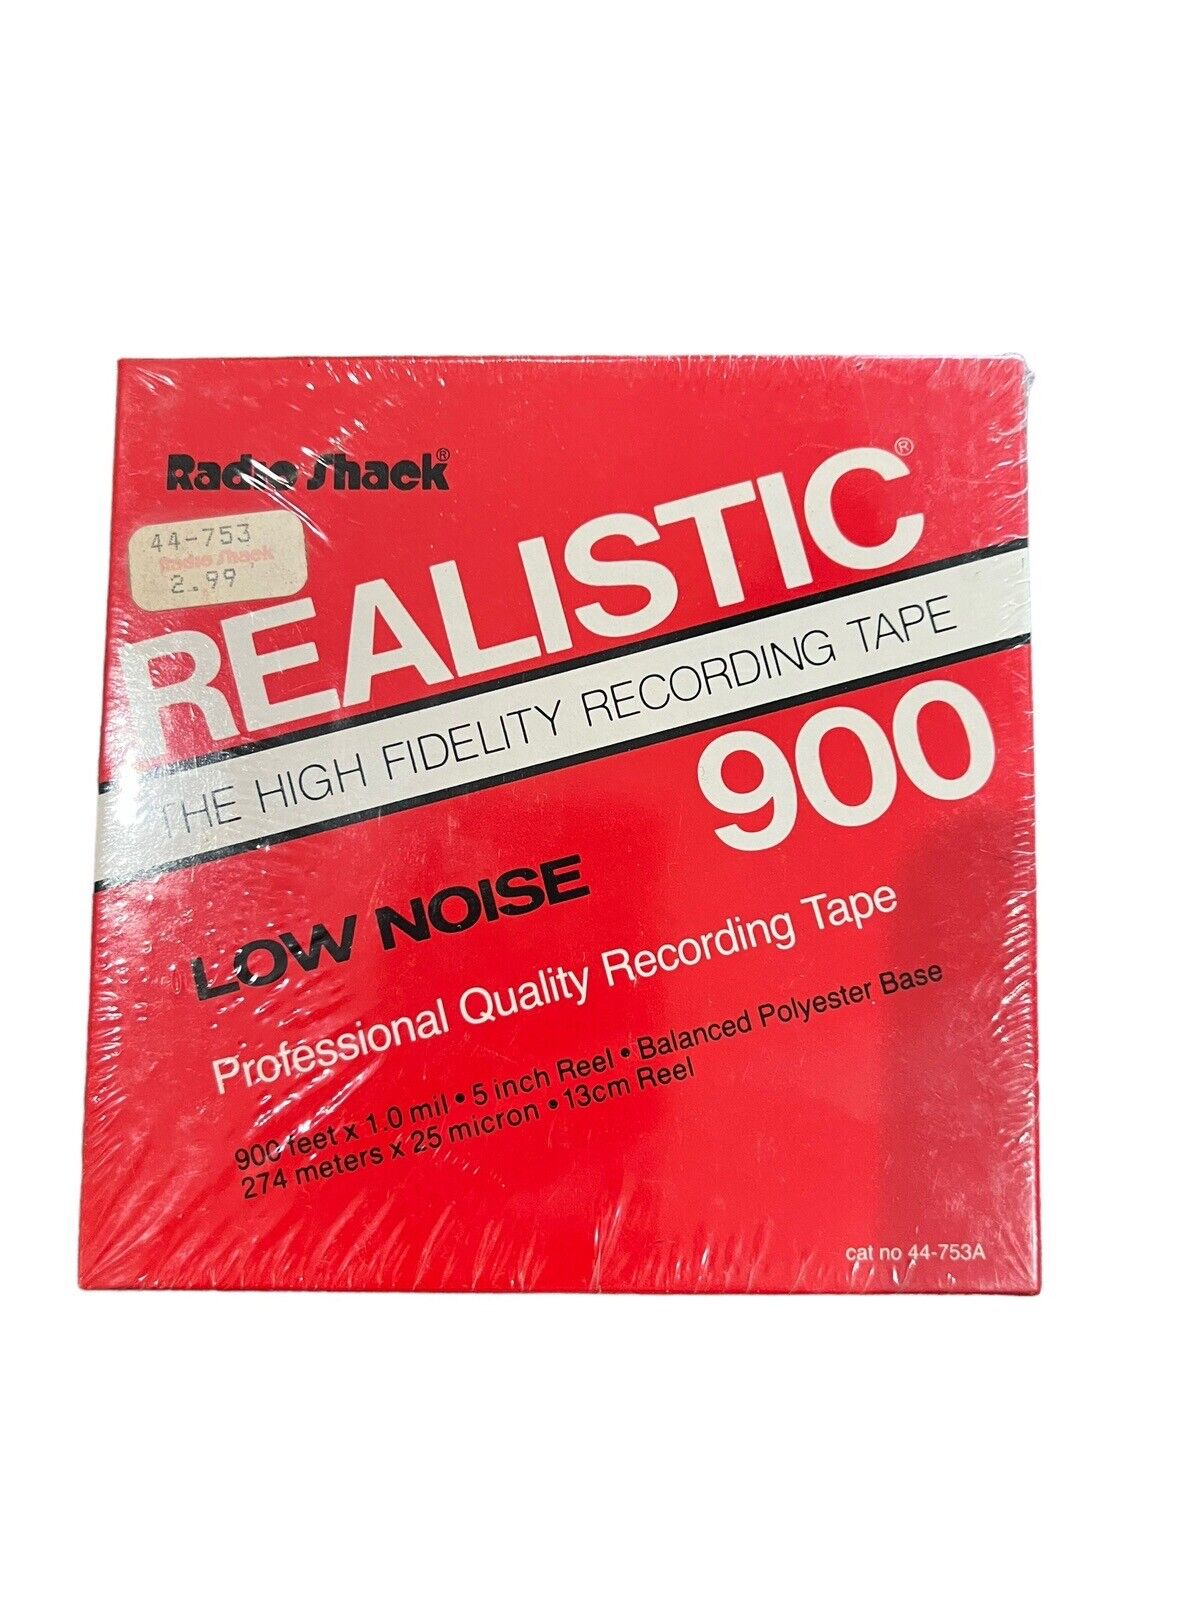 REALISTIC HIGH FIDELITY RECORDING TAPE SEALED 44-753A NOS